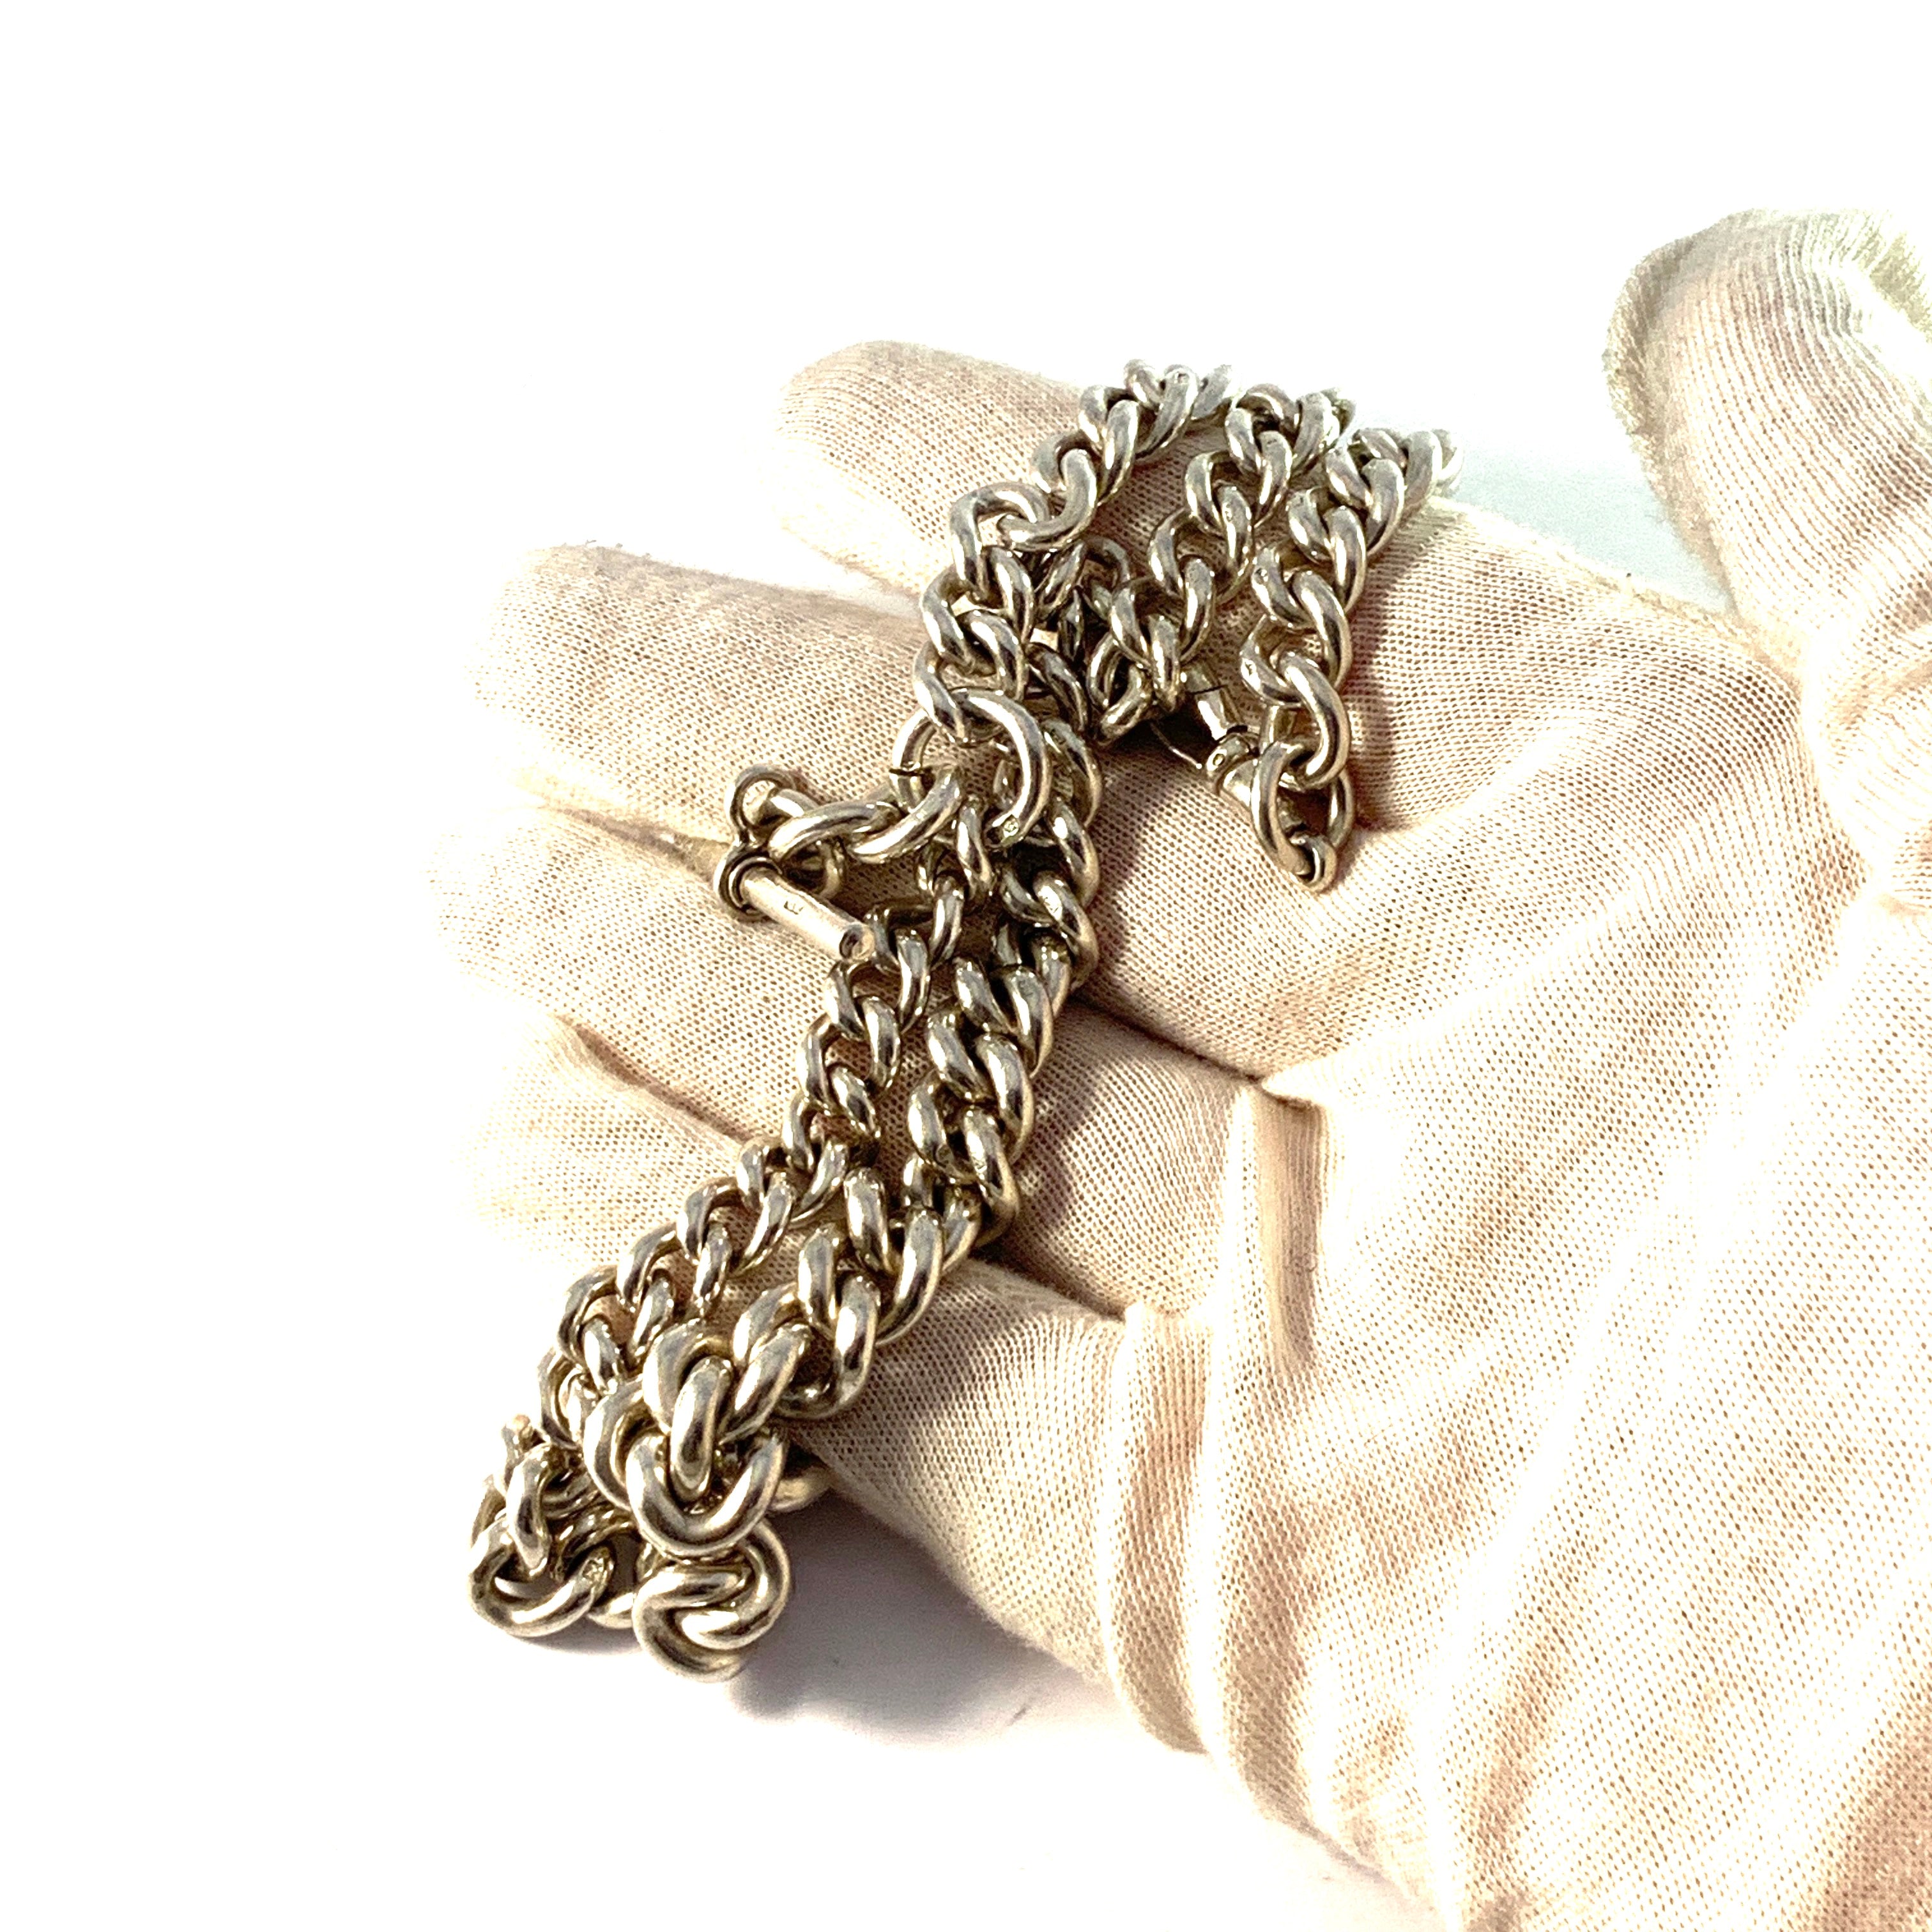 Henry Pope, Birmingham 1918. Antique Massive 4.3oz Sterling Silver Watch Chain in Necklace Length.